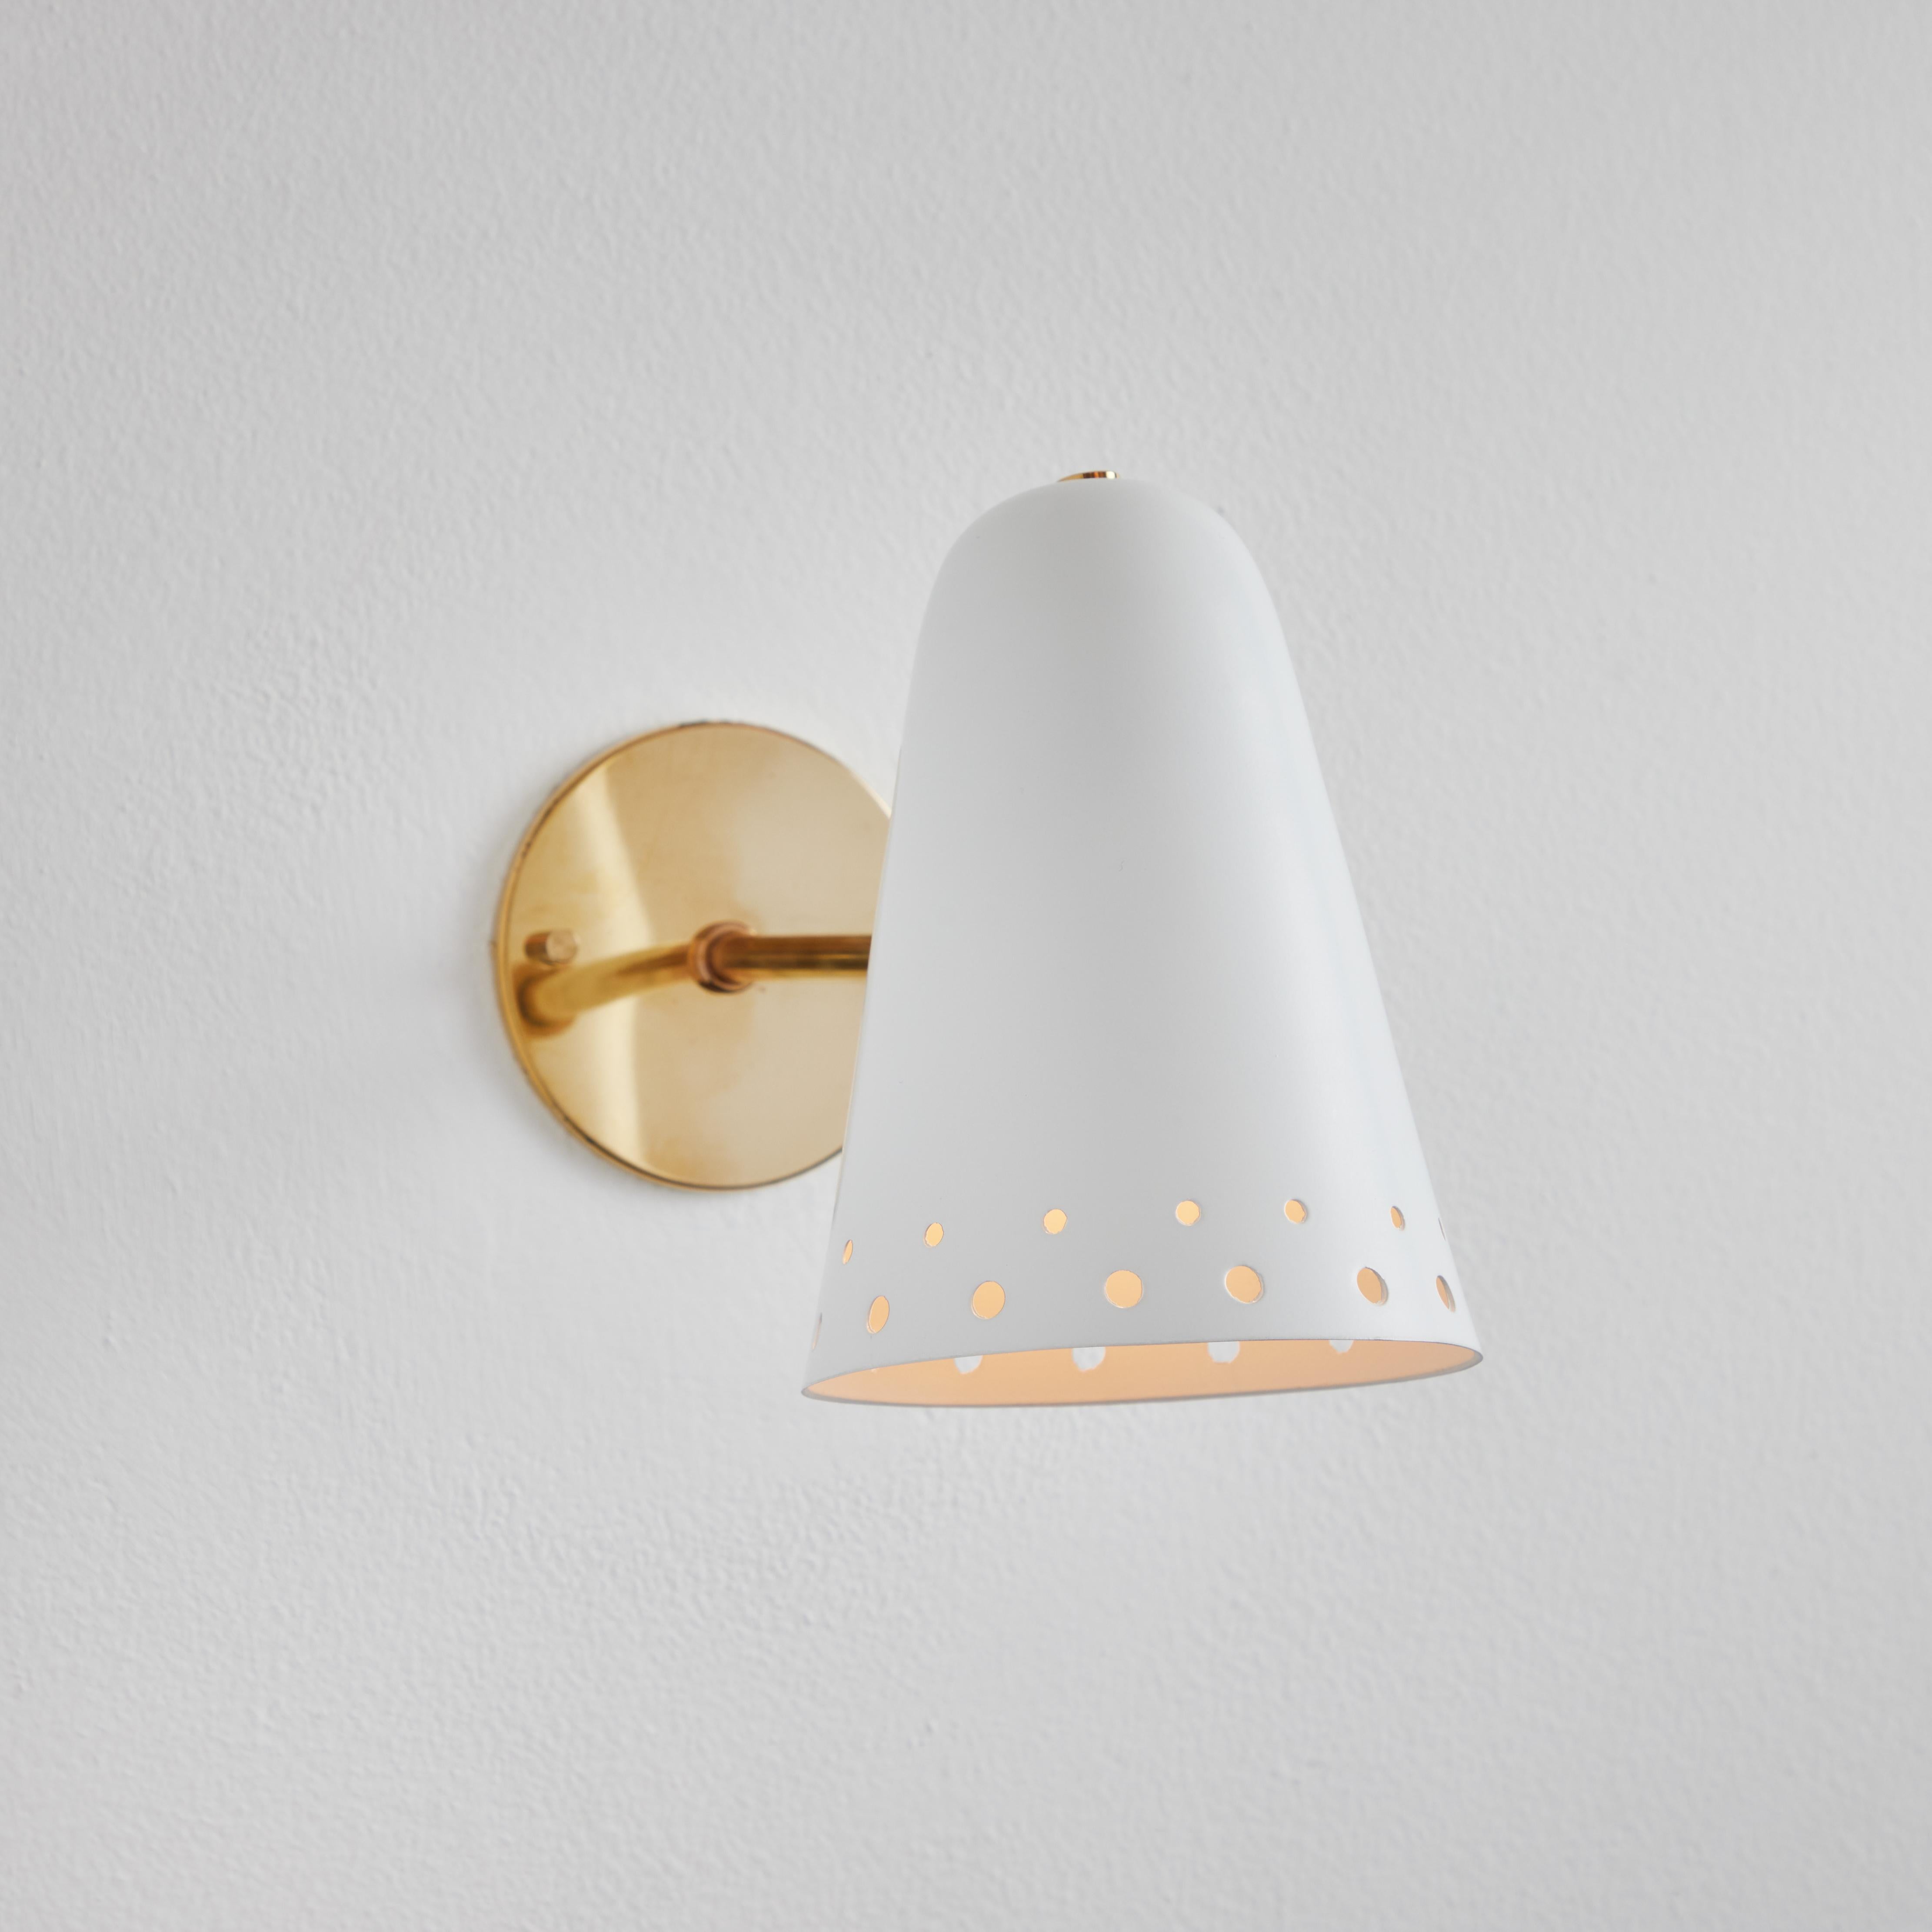 Rare 1950s Robert Mathieu Perforated White Metal and Brass Wall Sconce For Sale 8